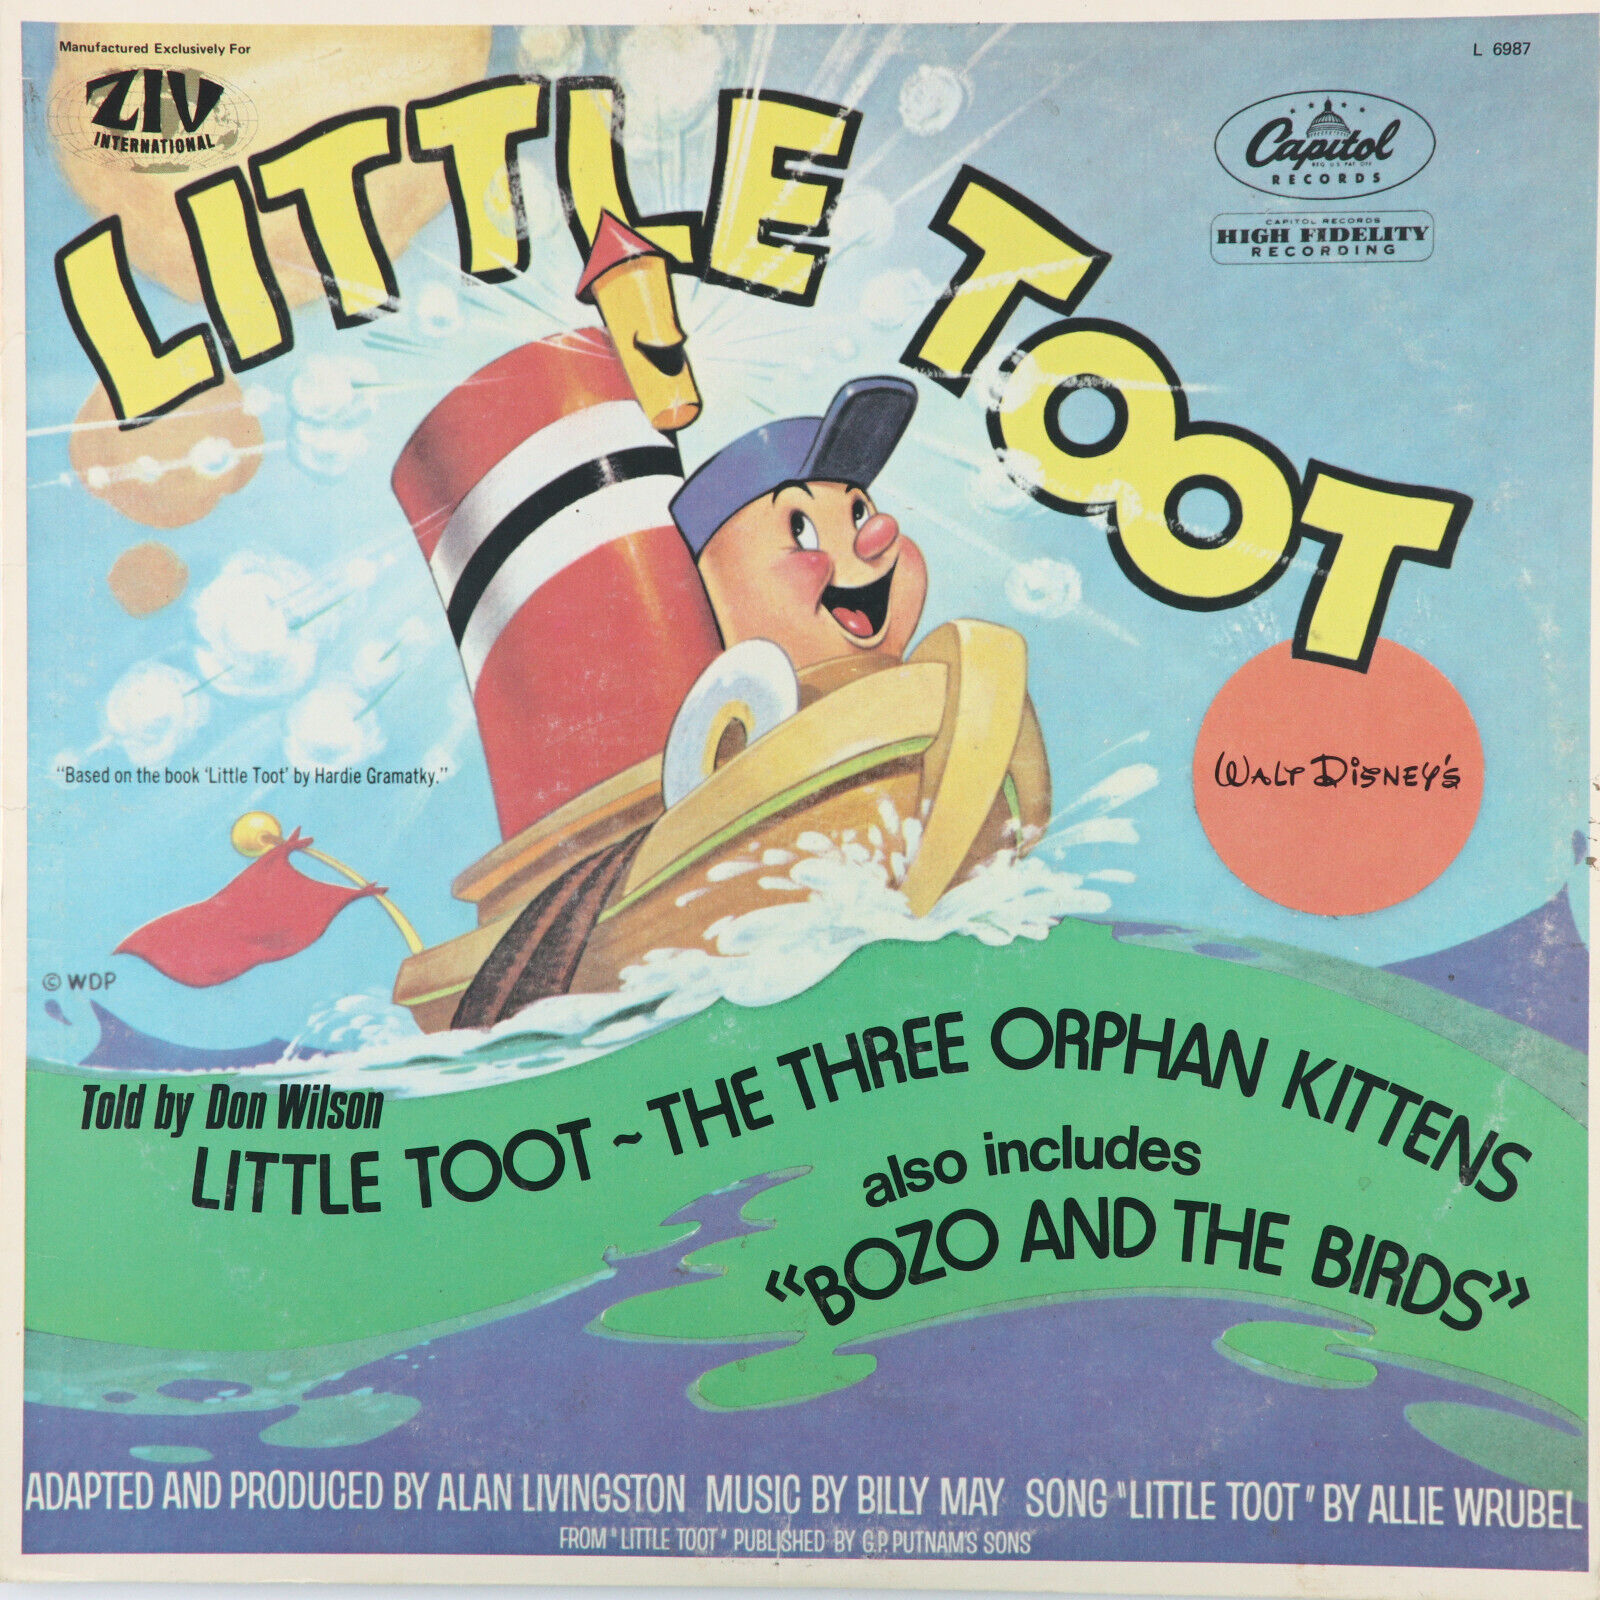 Don Wilson – Little Toot - Three Orphan Kittens 1975 LP Capitol Records – L 6987